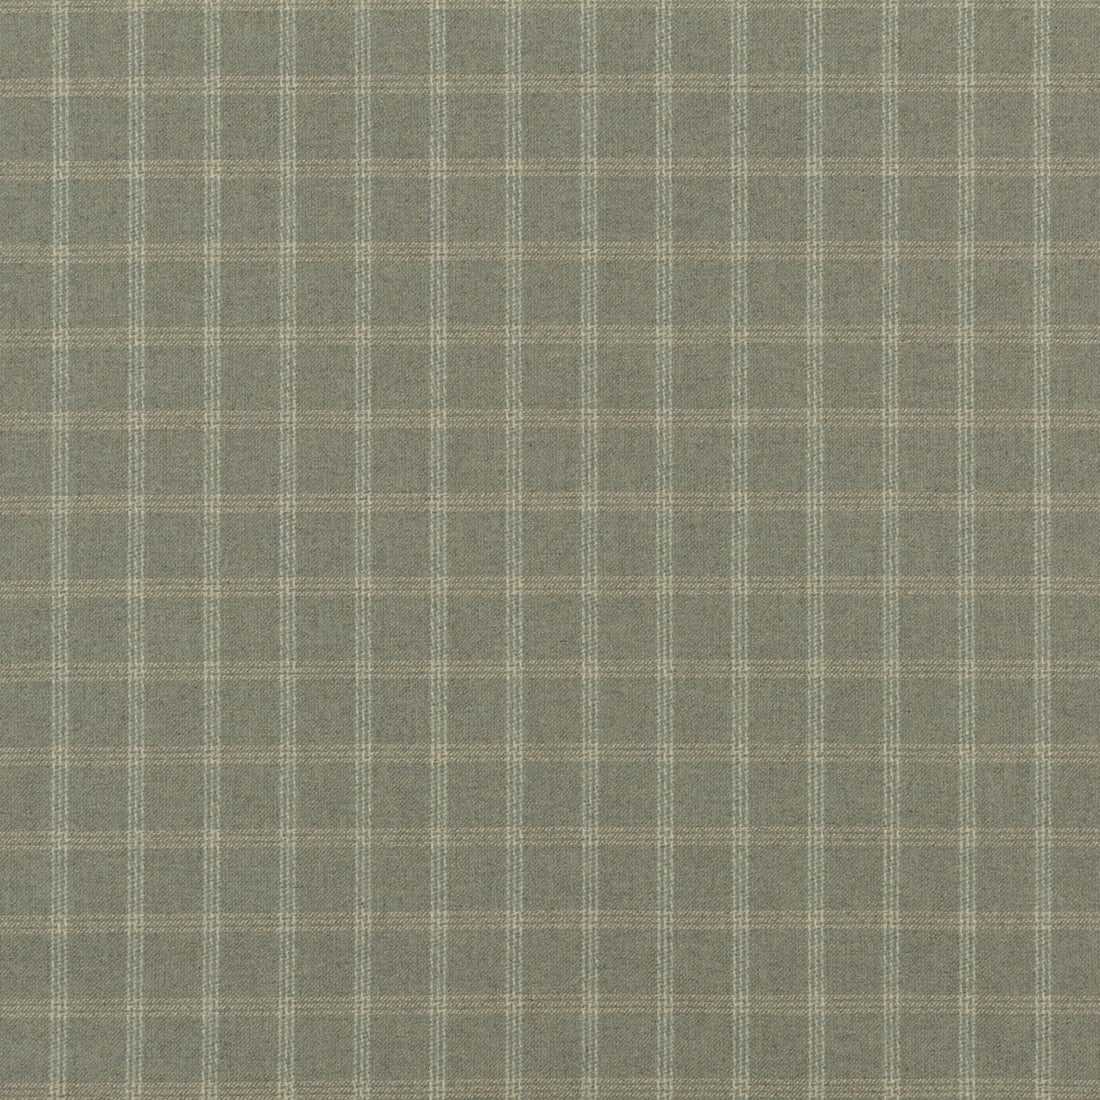 Bute fabric in soft lovat color - pattern FD749.R106.0 - by Mulberry in the Festival collection